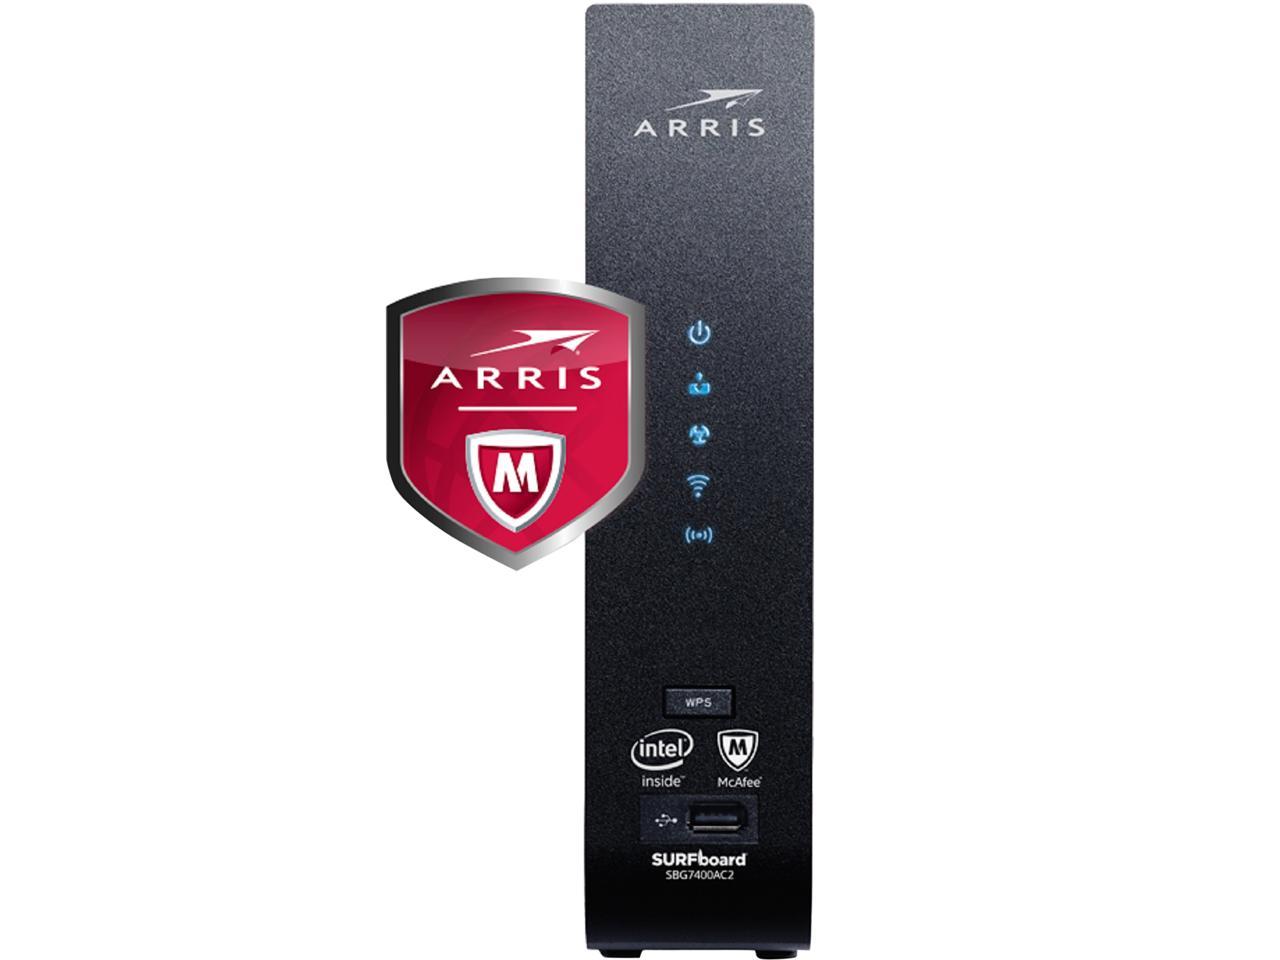 Arris SURFboard SBG7400AC2 Cable Modem and Wi-Fi Router with ARRIS 